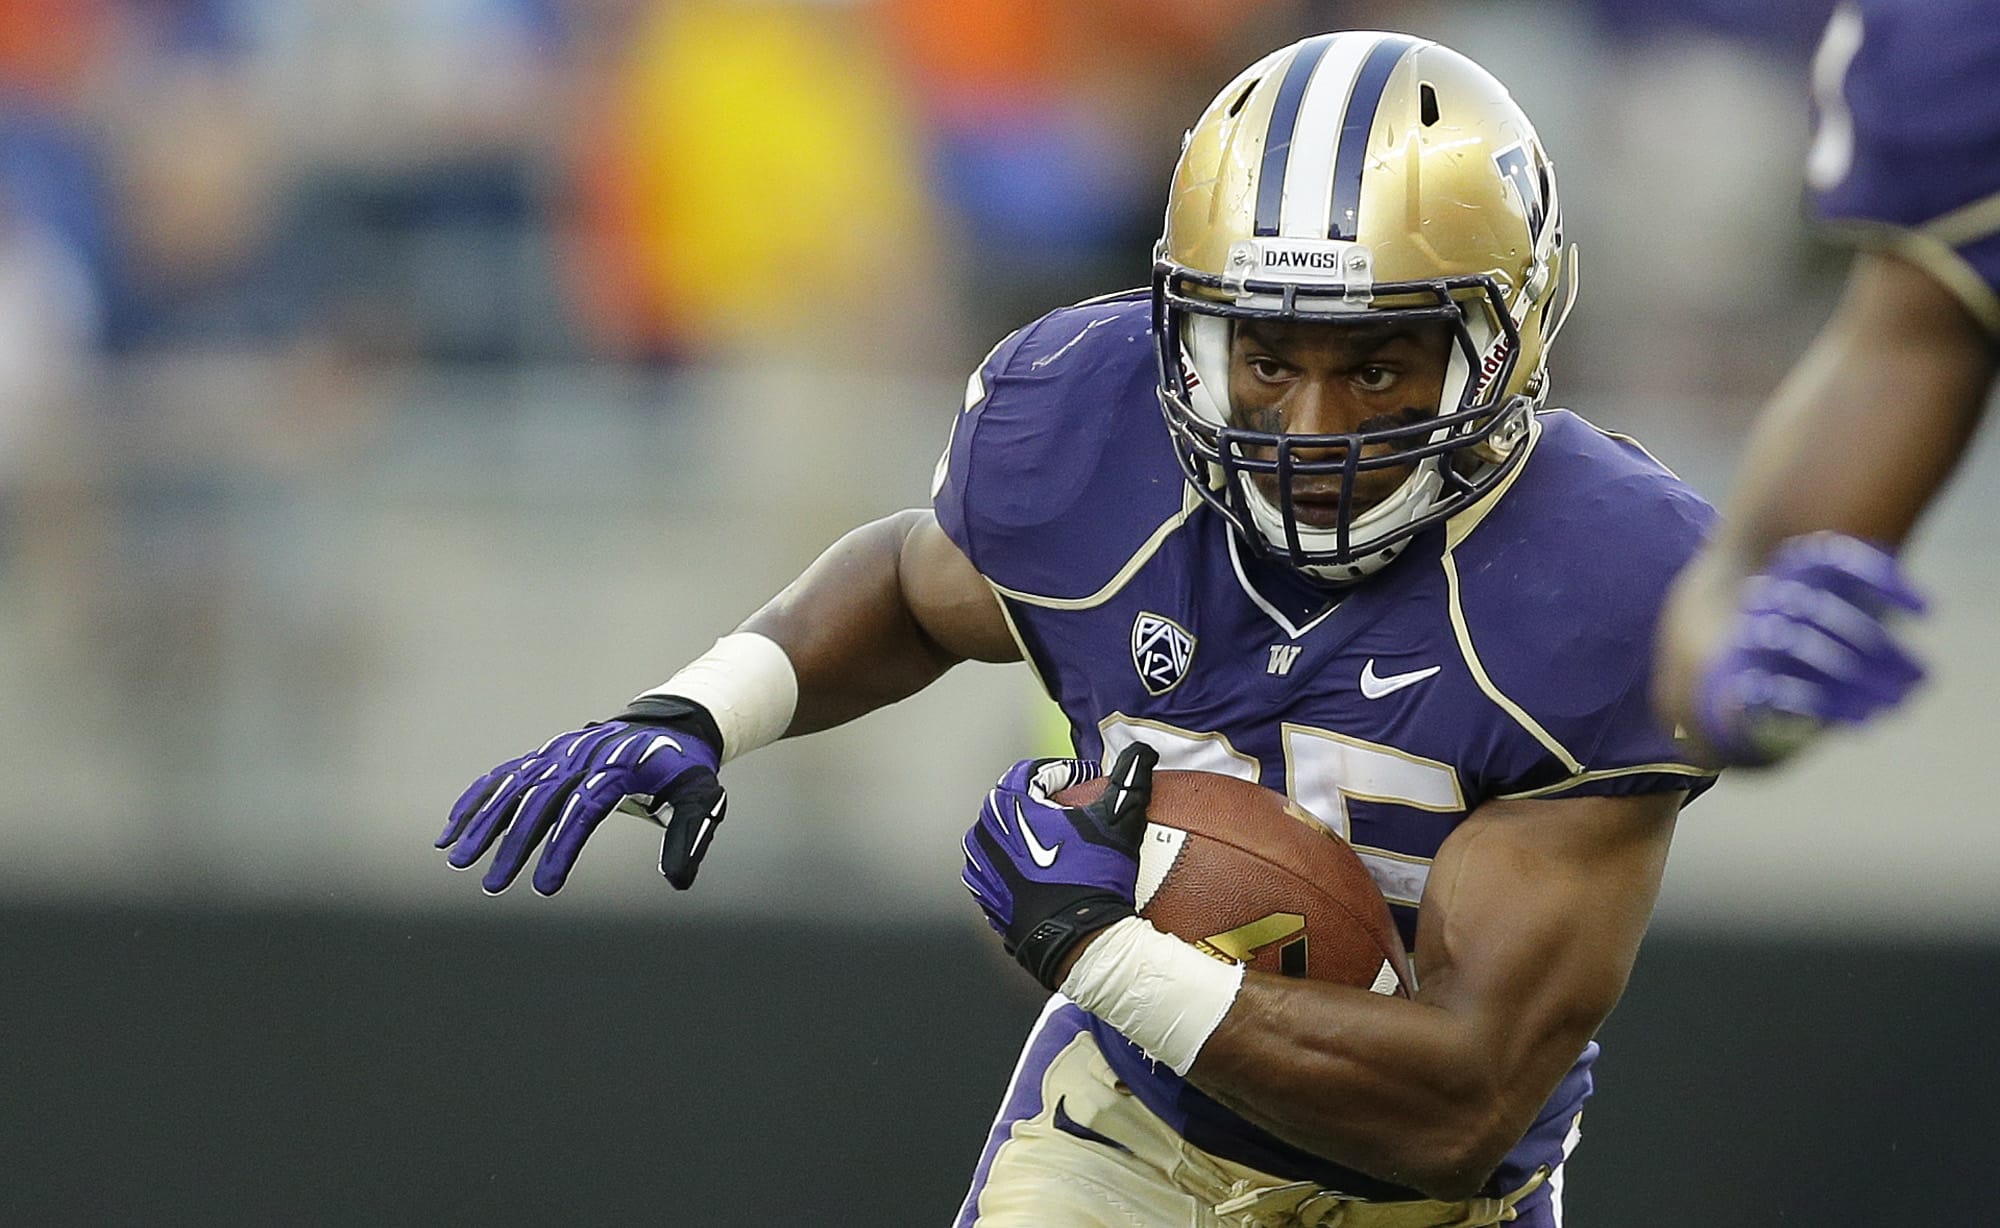 Washington's Bishop Sankey was the first running back taken in the 2014 NFL draft, picked by the Tennessee titans with the 54th overall pick. (AP Photo/Ted S.